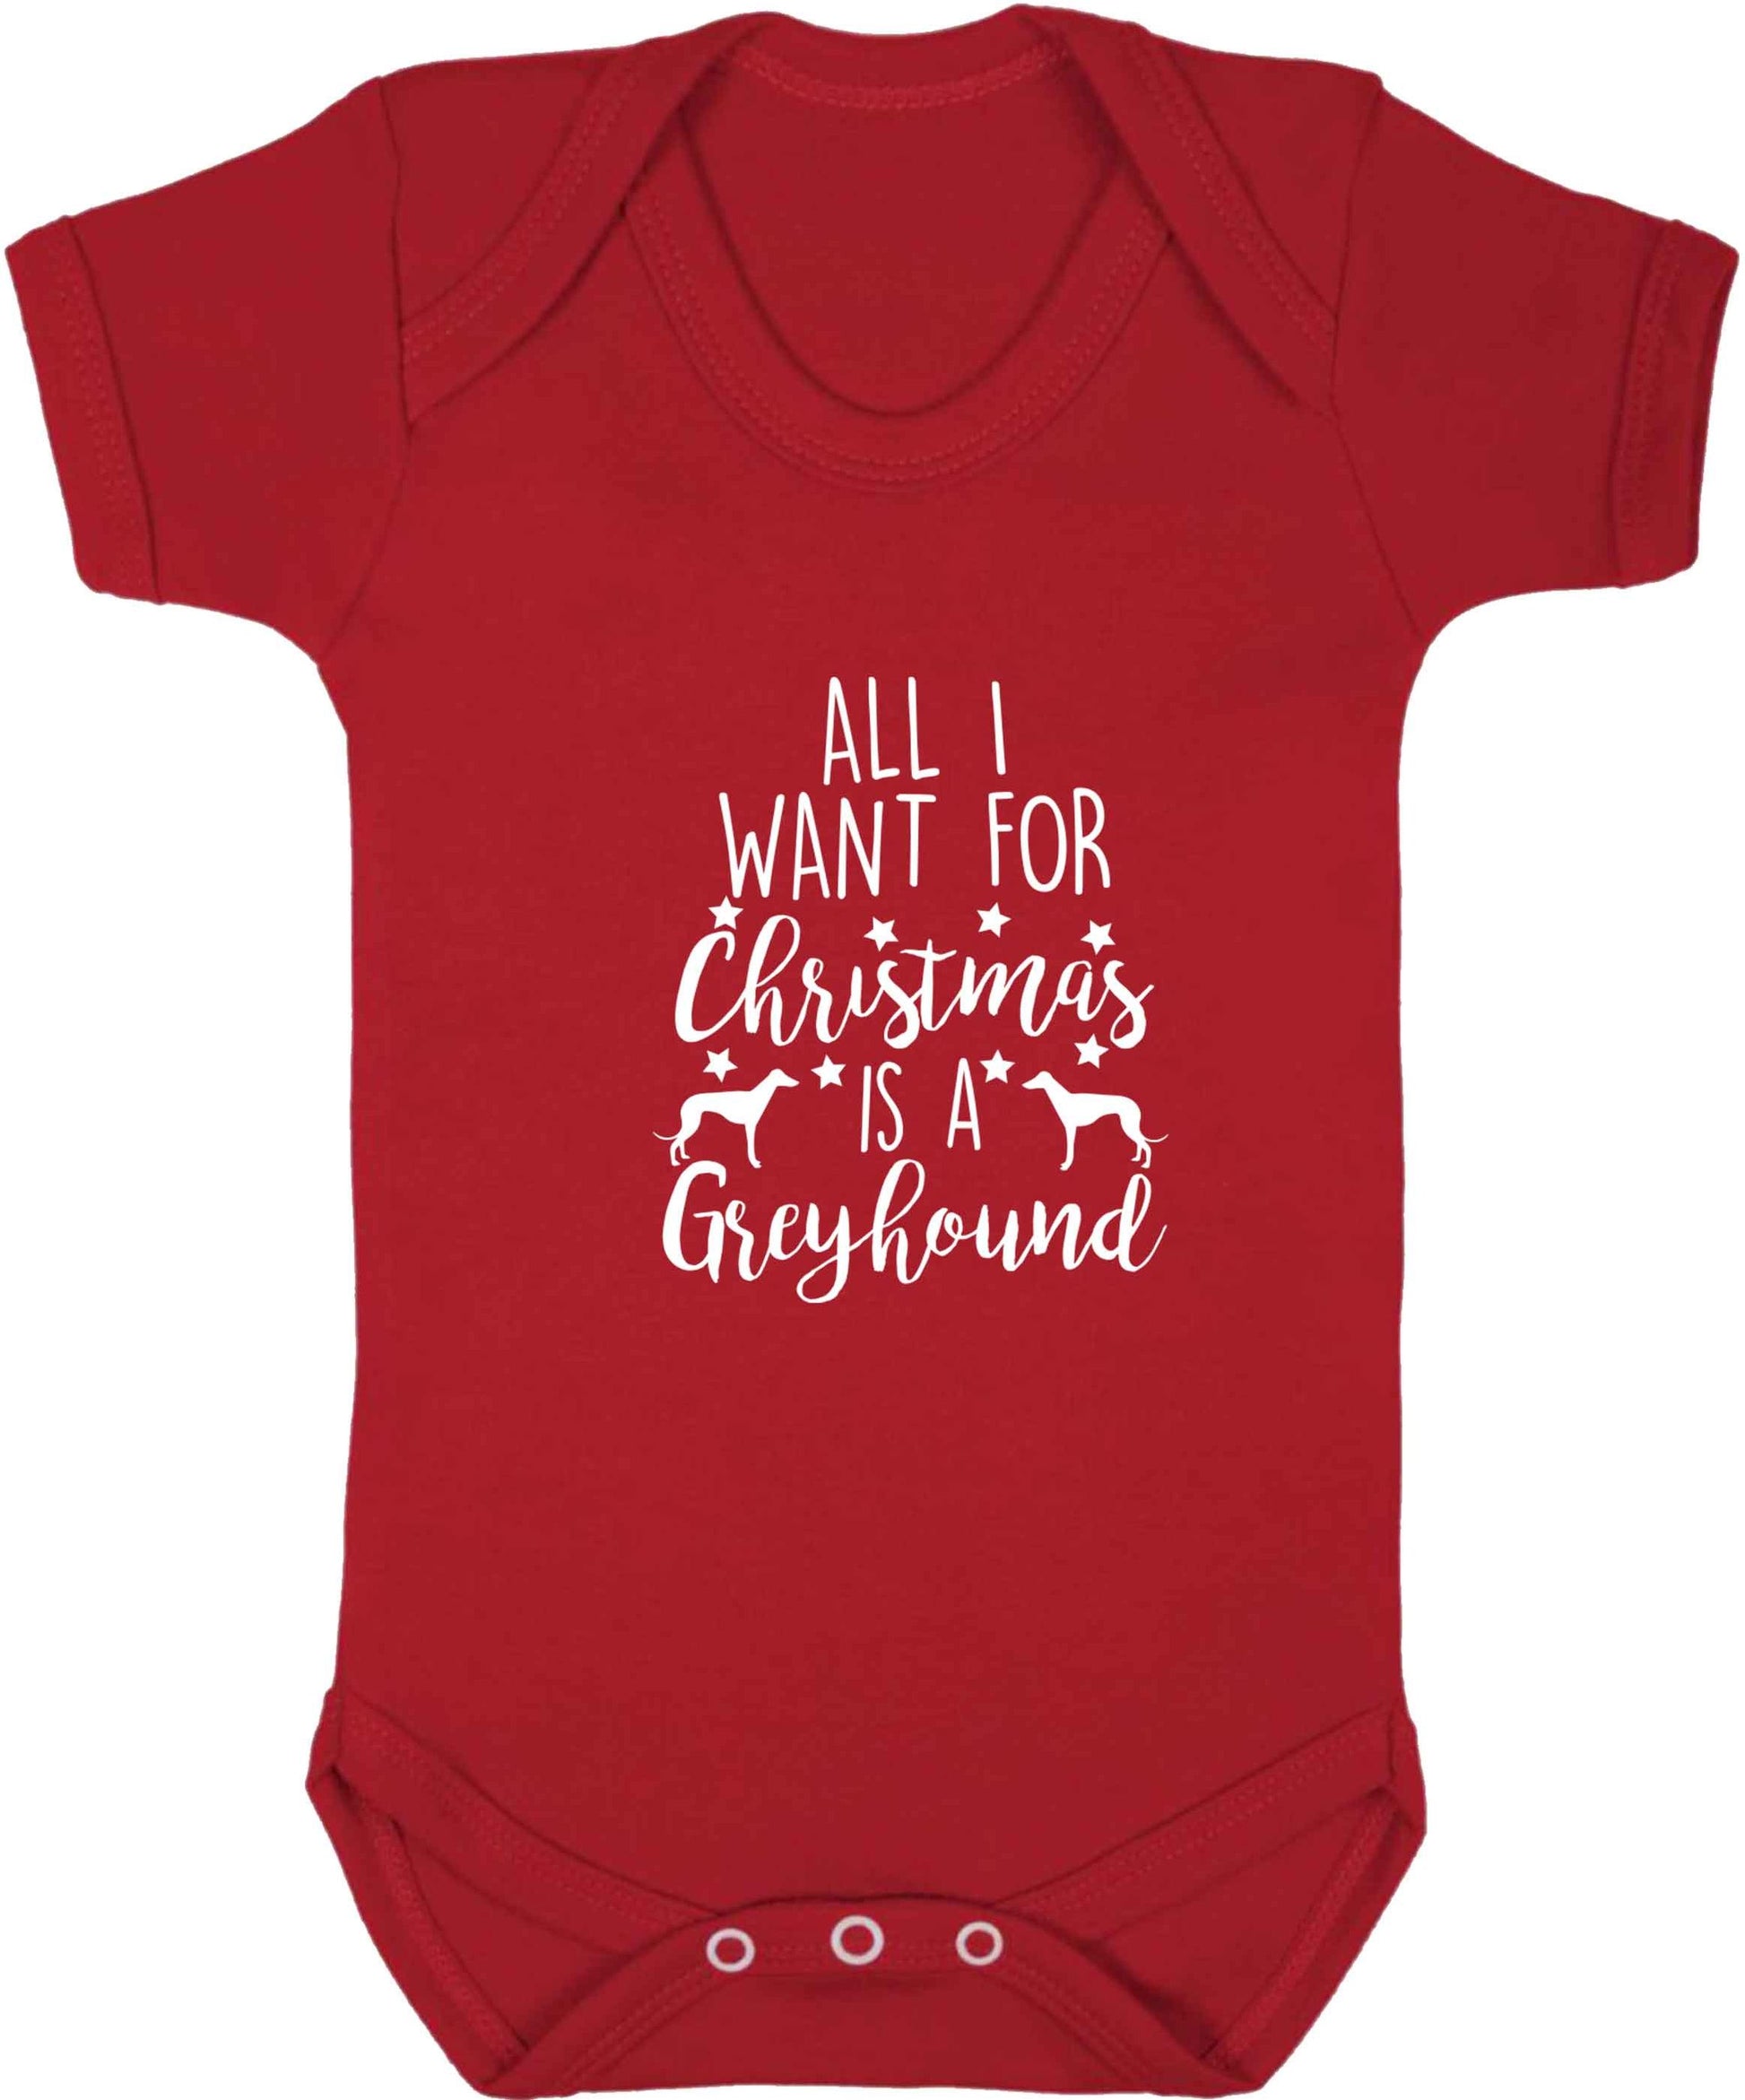 All I want for Christmas is a greyhound baby vest red 18-24 months